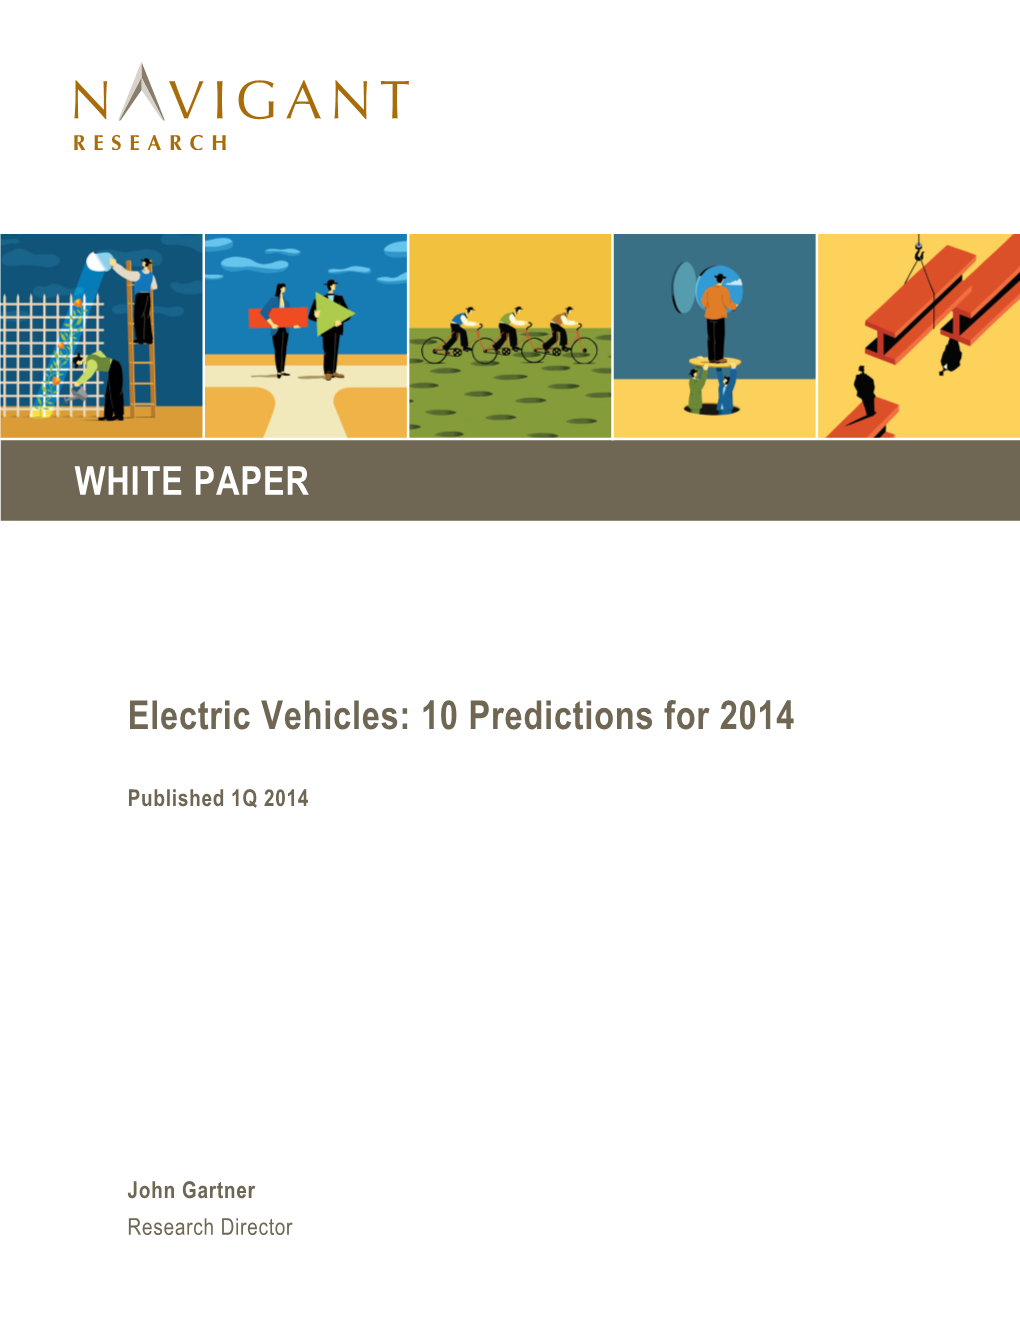 Electric Vehicles: 10 Predictions for 2014